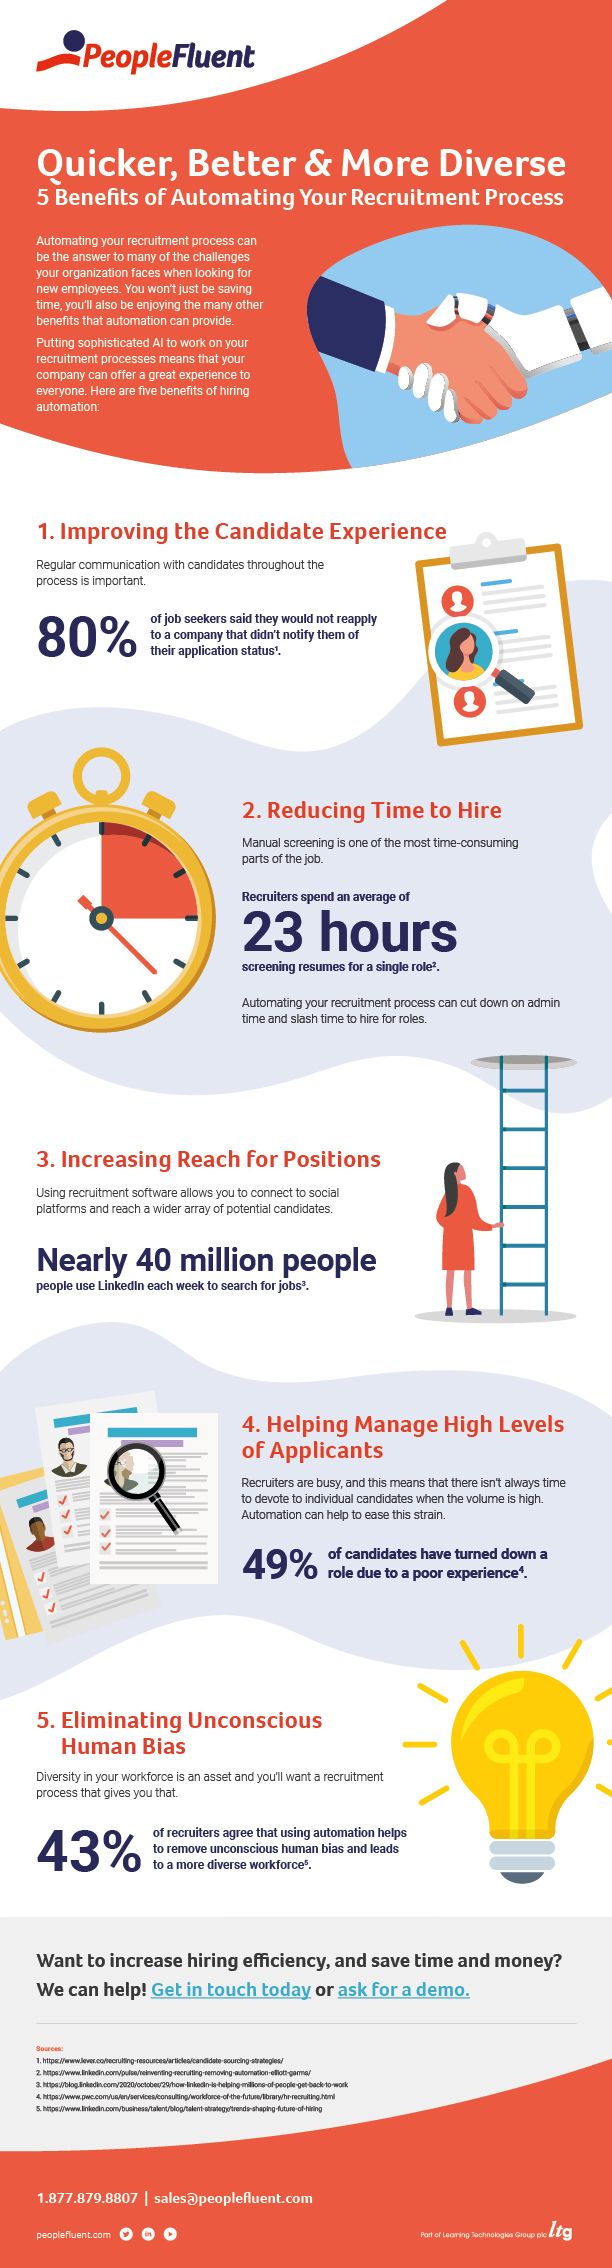 Infographic on 5 Benefits of Automating Your Recruitment Process